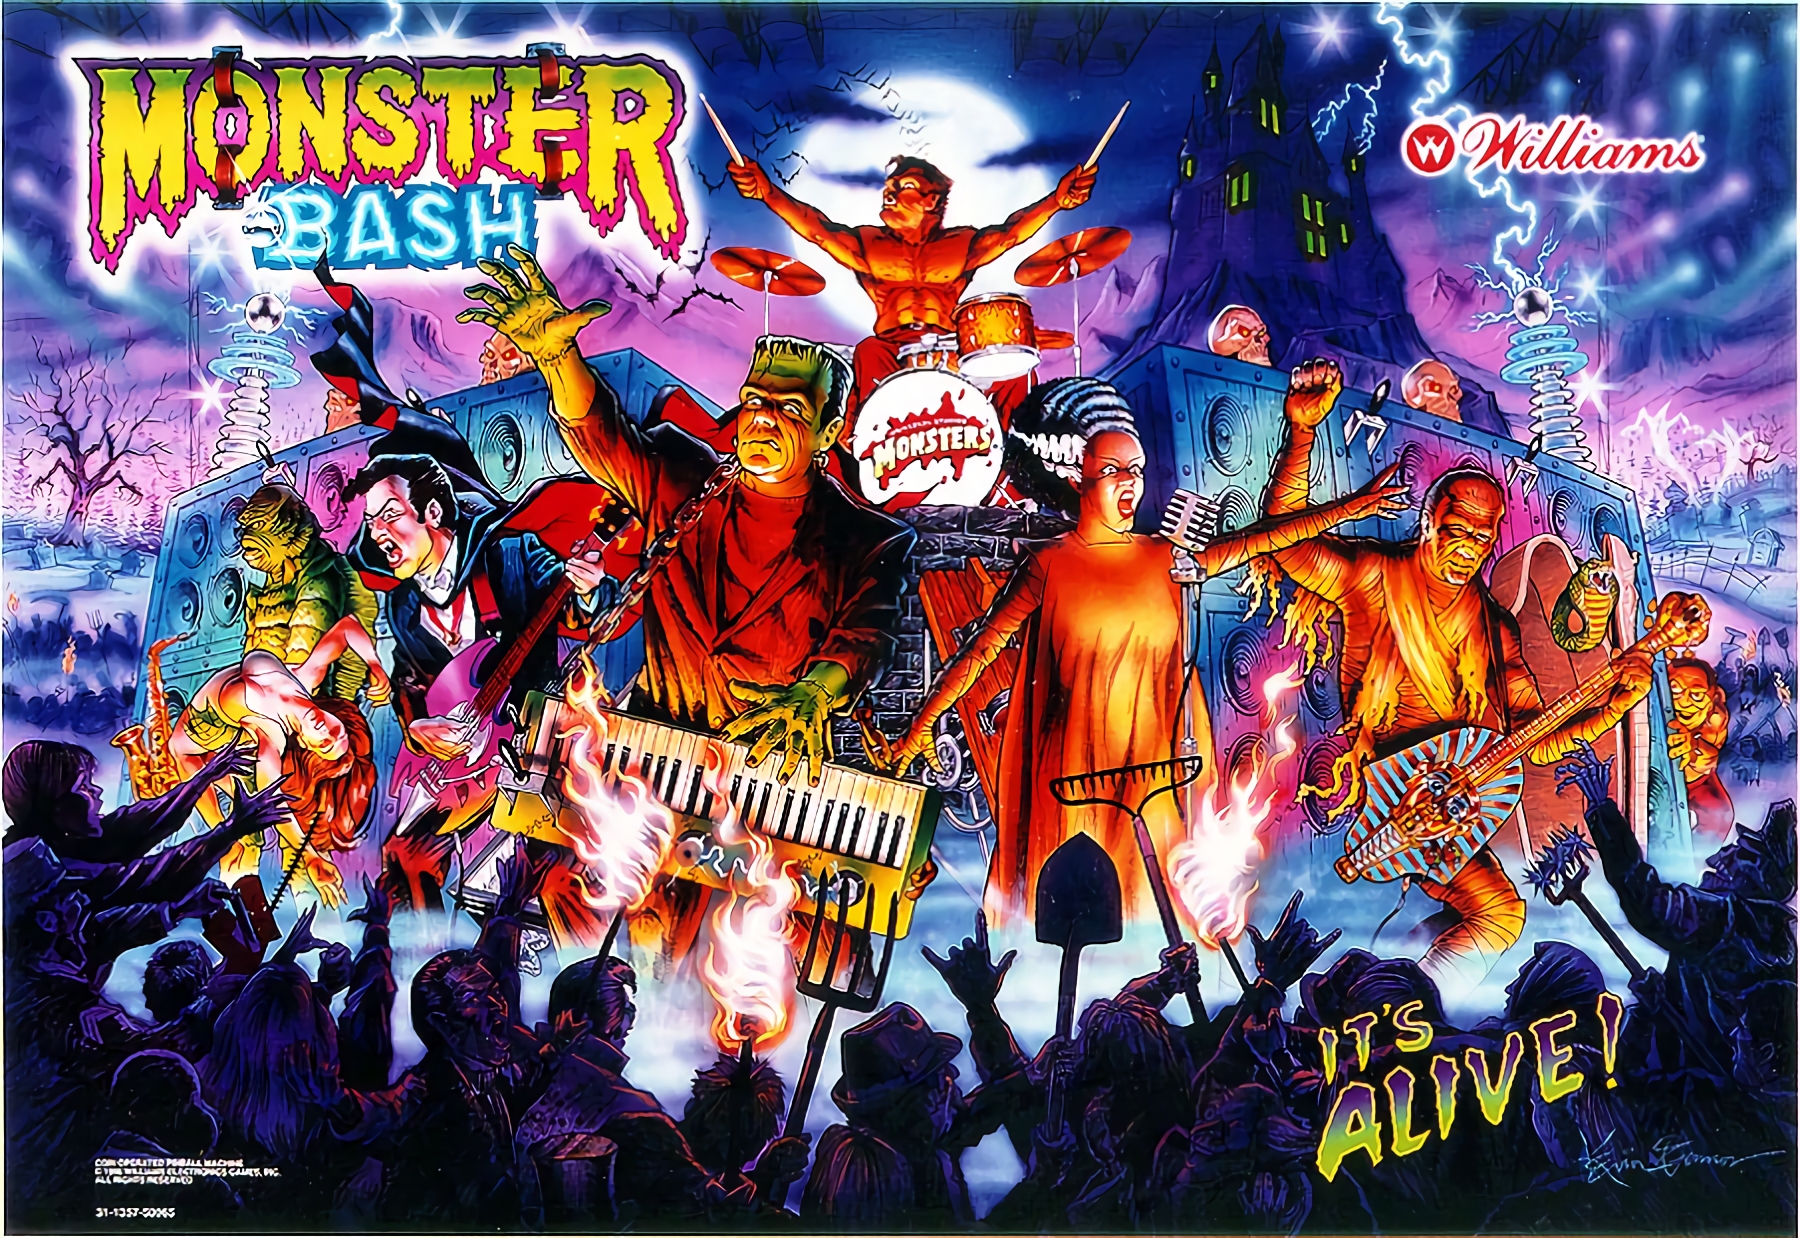 Monster Bash (Williams, 1998) (IkeS) Backglass